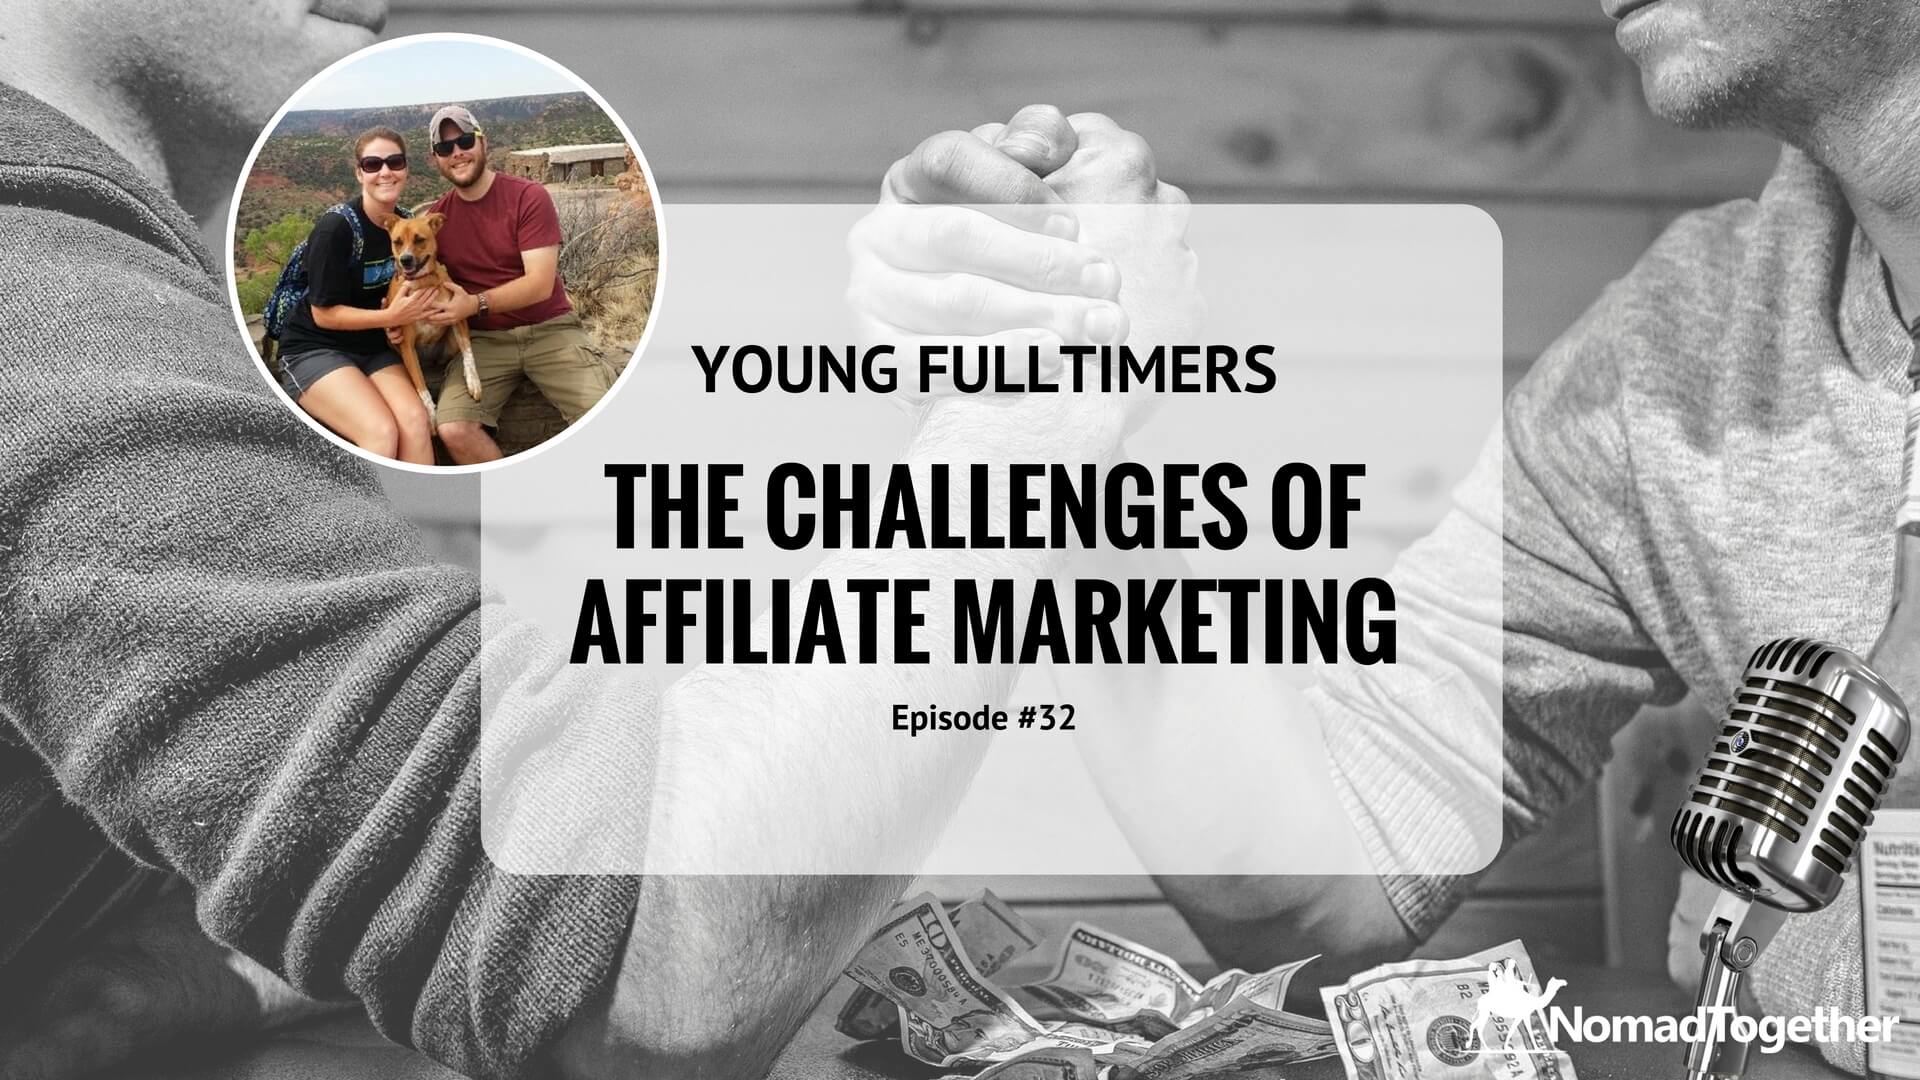 Episode #32: The Challenges of Affiliate Marketing with Kimberly and Joe of Young Fulltimers